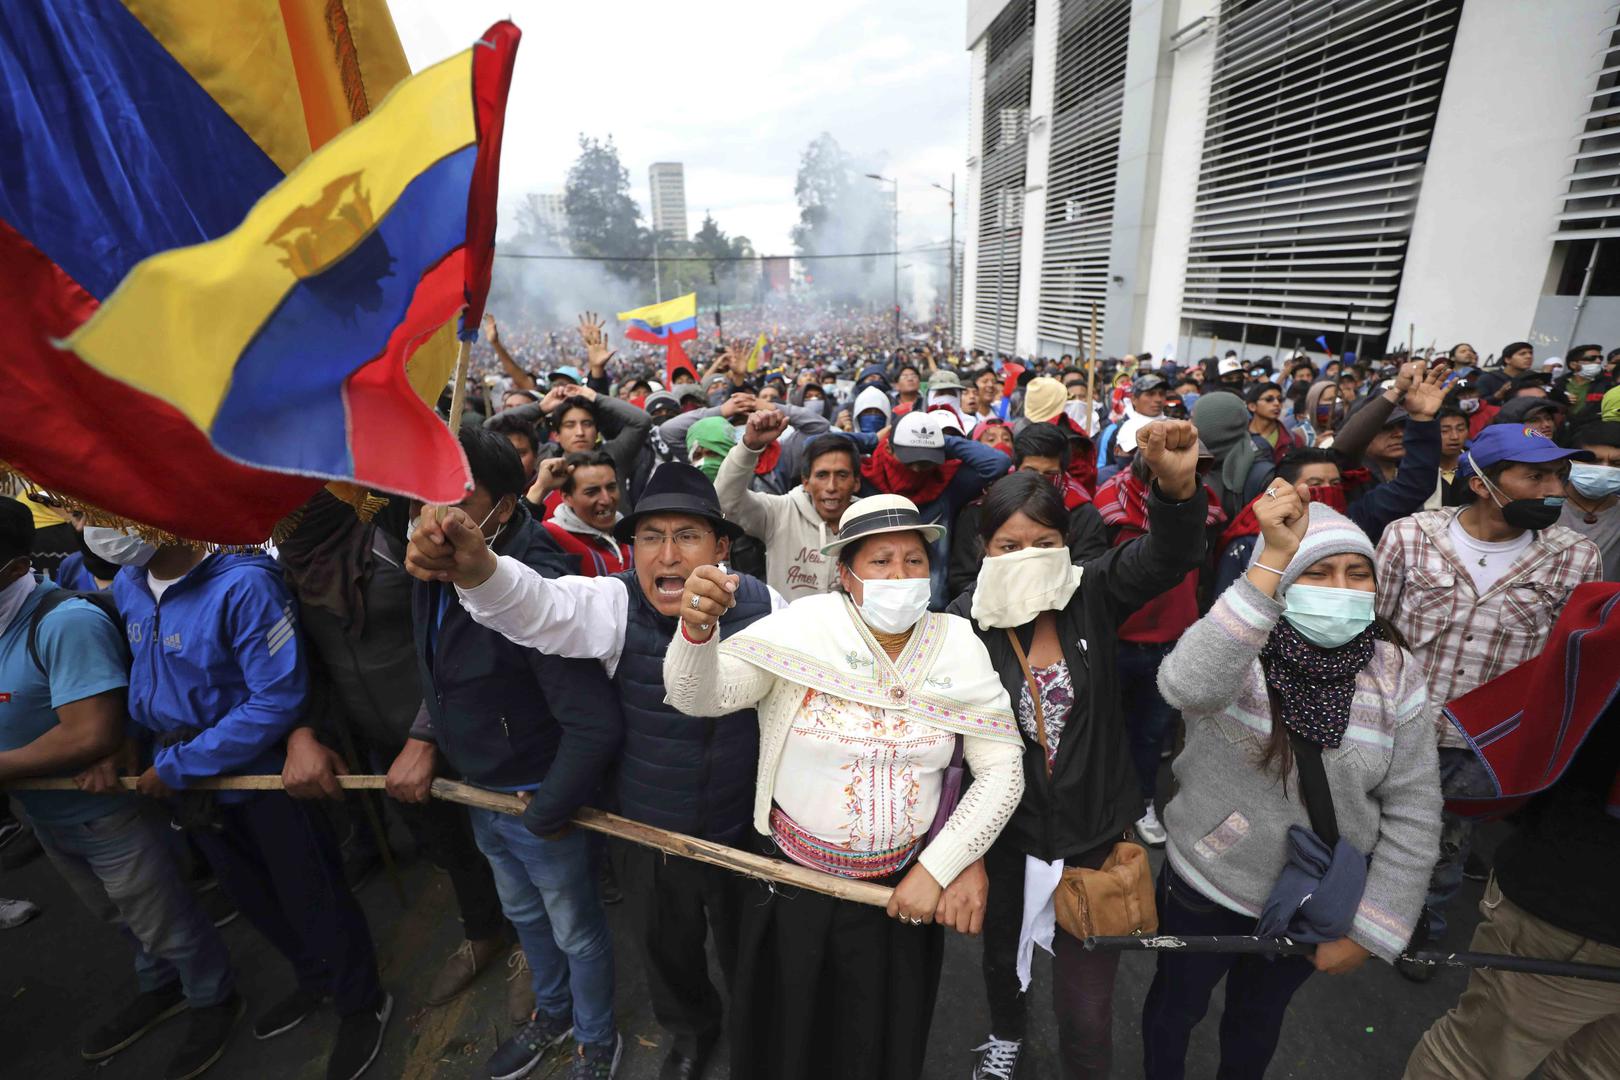 Anti-government demonstrators chant slogans against President Lenin Moreno and his economic policies during a protest in Quito, Ecuador, Tuesday, Oct. 8, 2019.